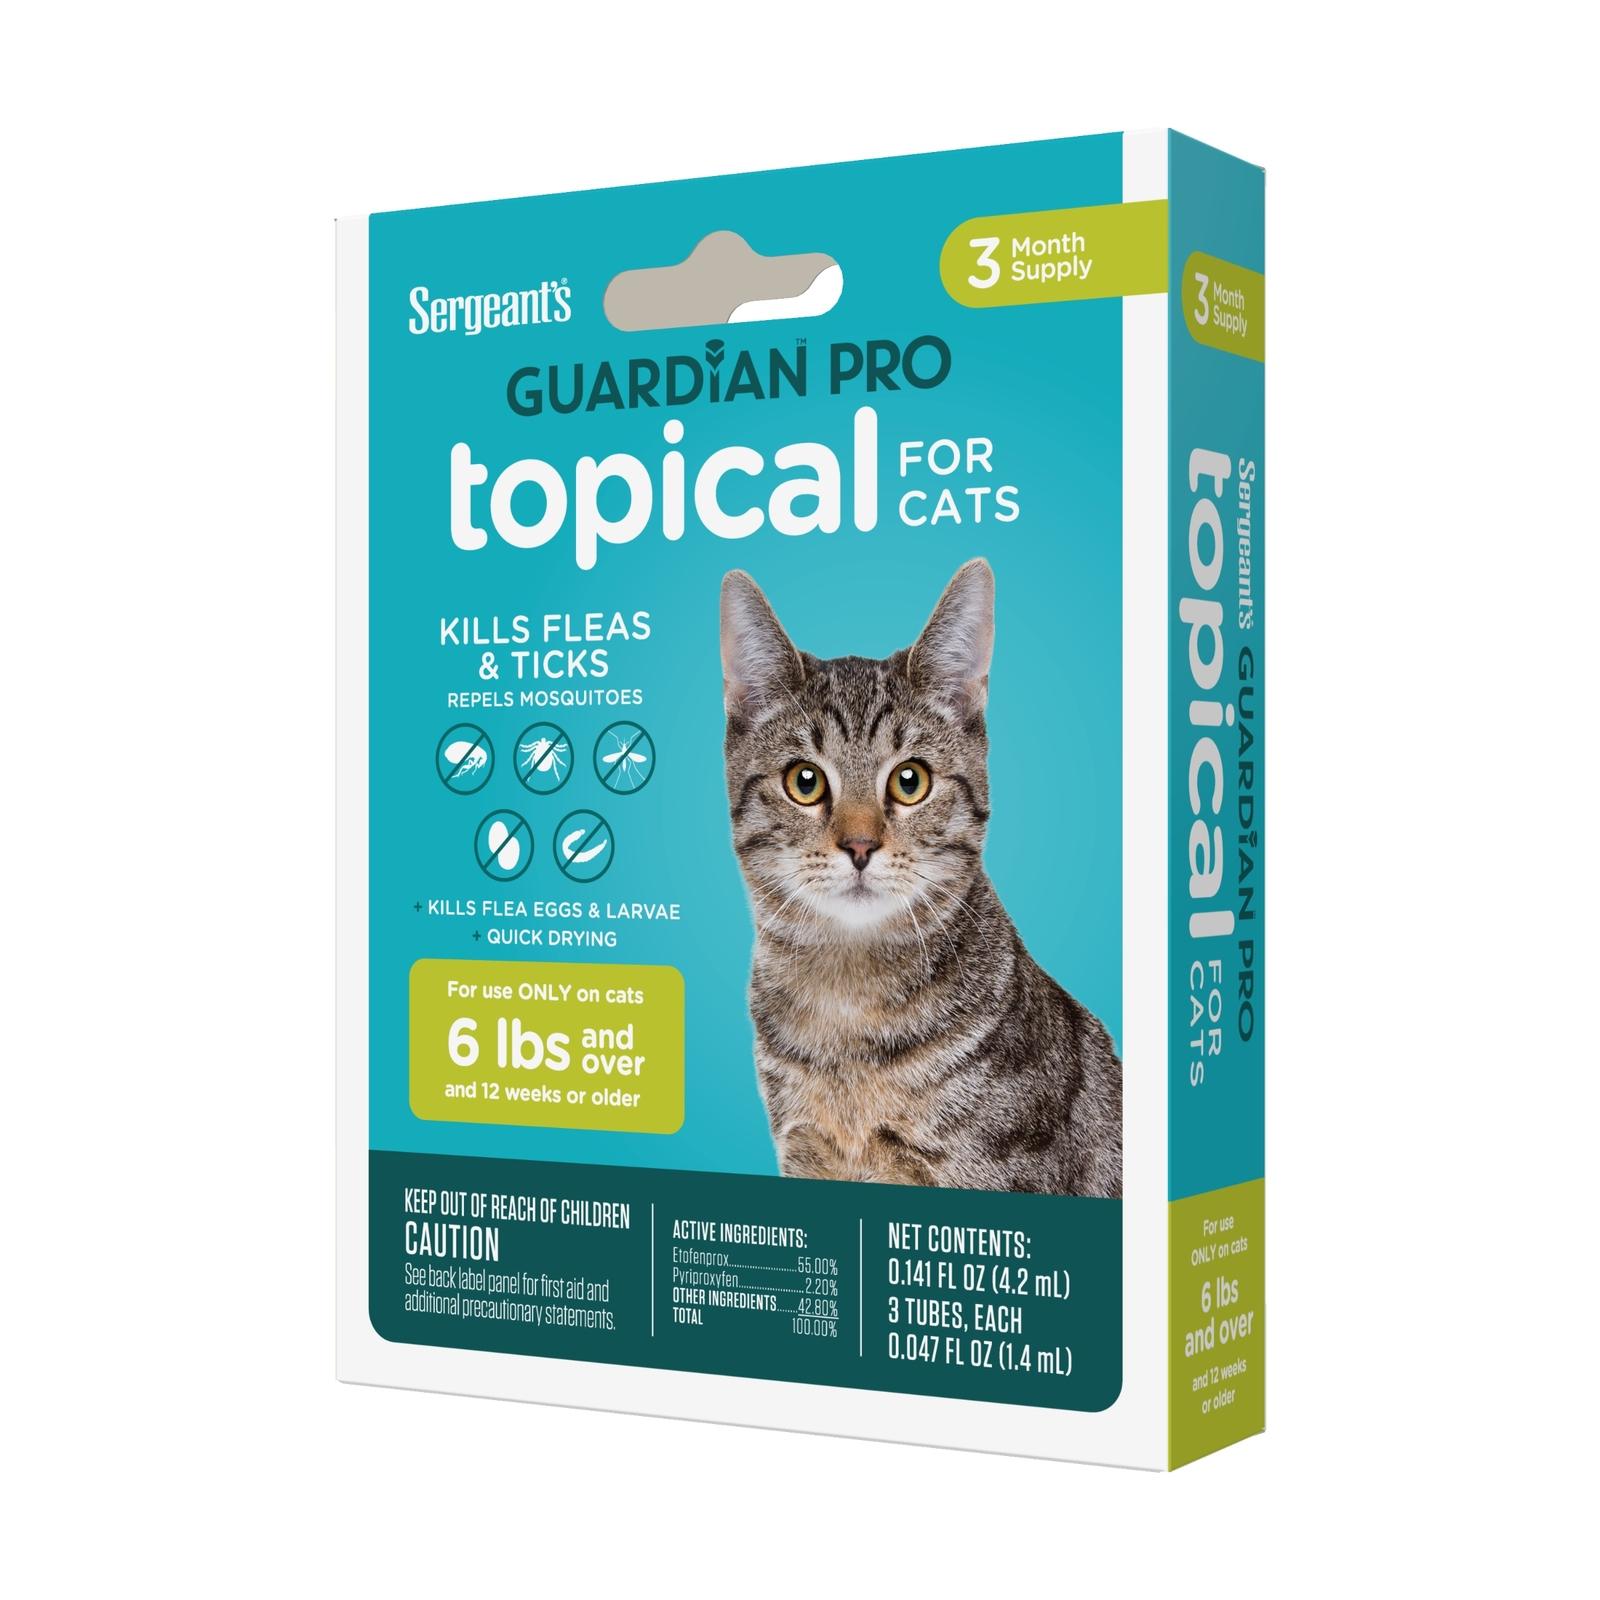 Sergeant's Guardian Pro Flea & Tick Topical for Cats, 6 lbs and Over, 3 Count